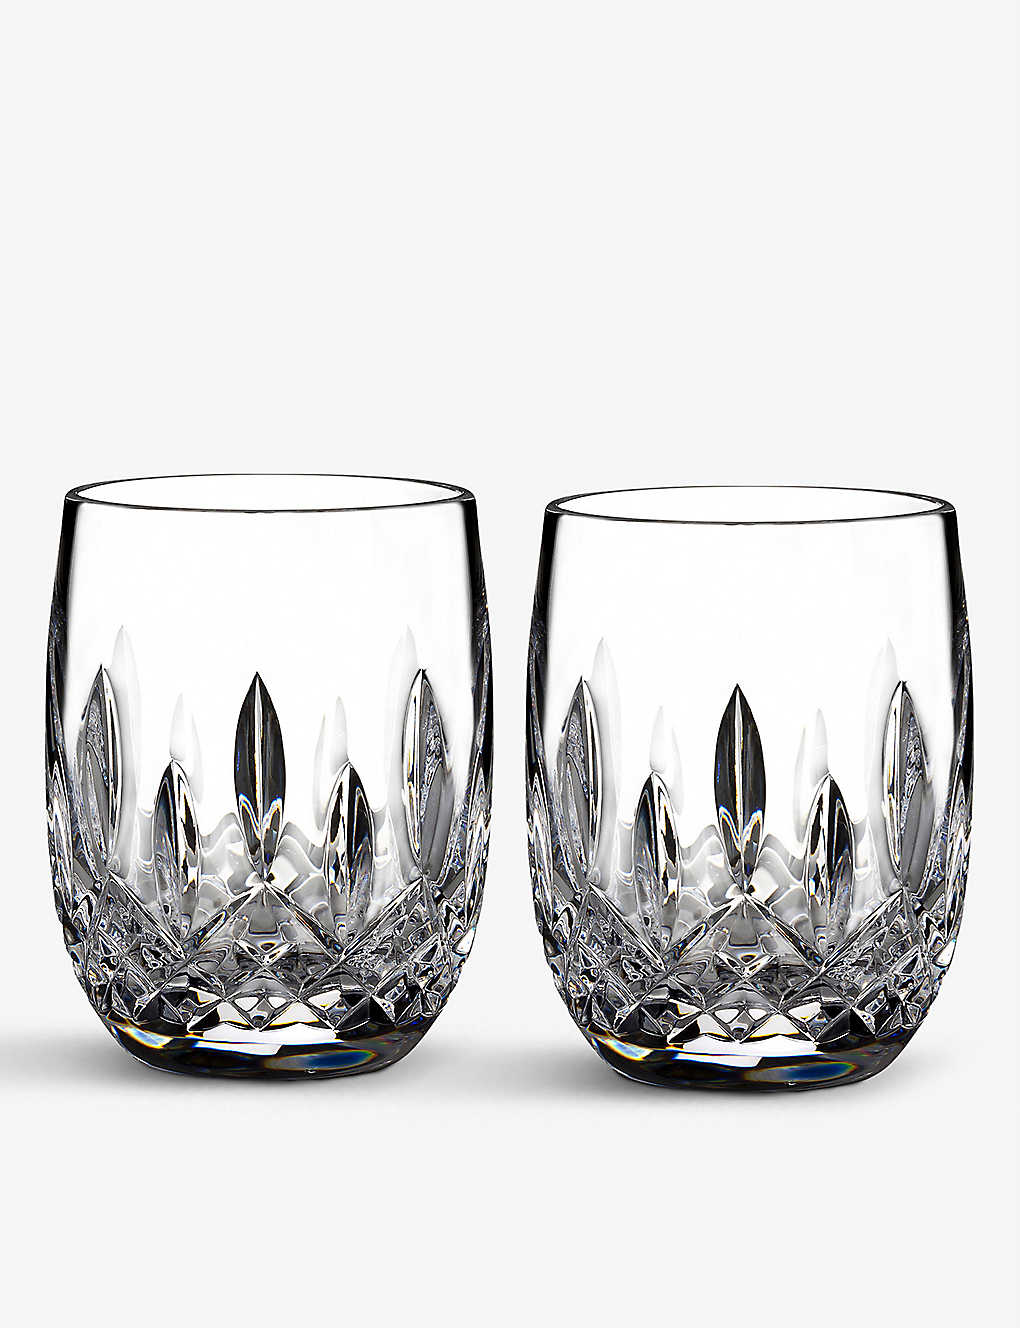 Shop Waterford Lismore Connoisseur Engraved Crystal Tumblers Set Of Two